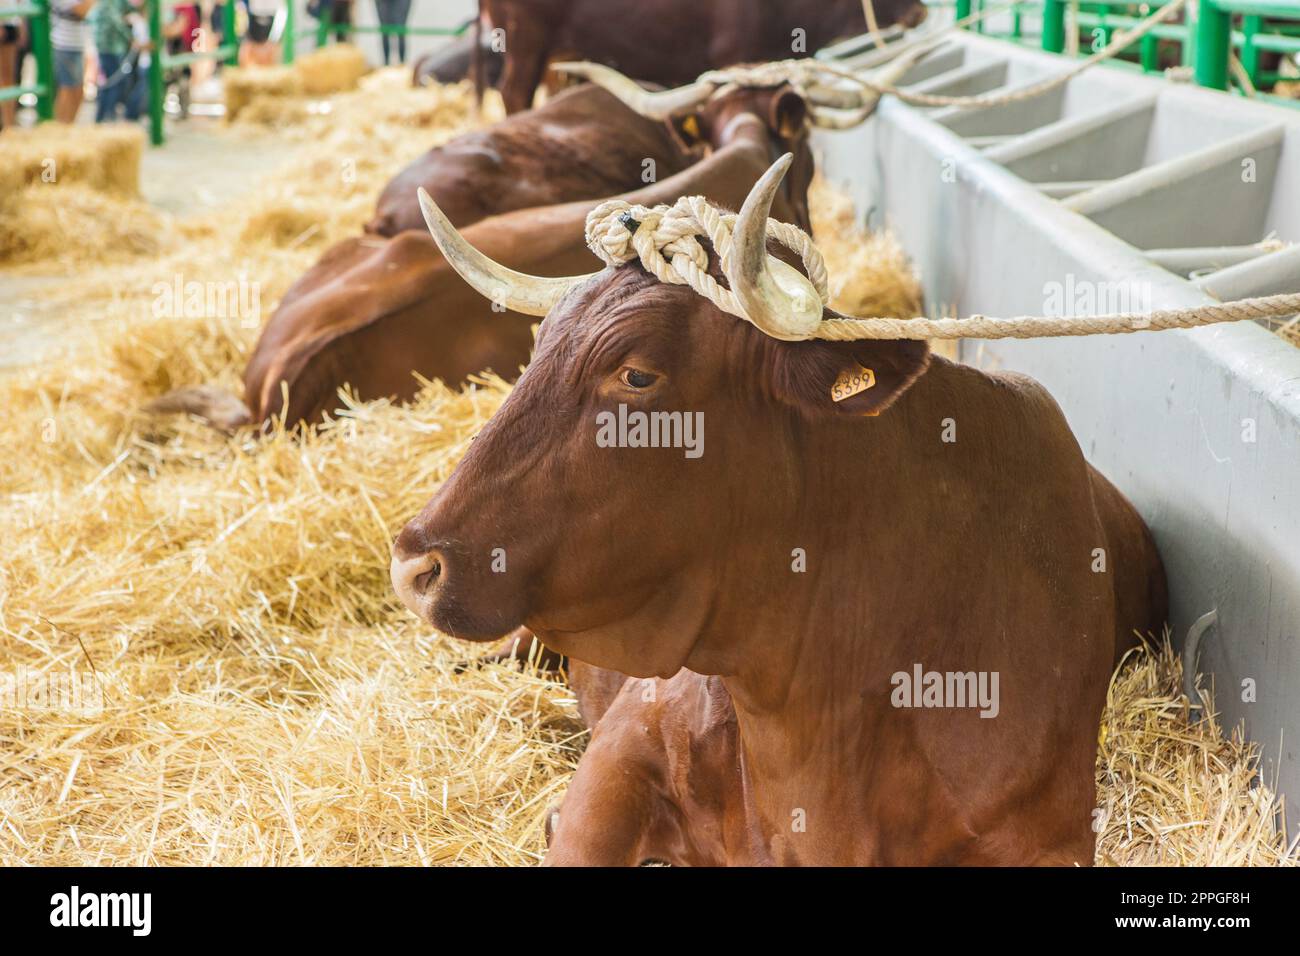 Bovine stallion tied by the horns Stock Photo